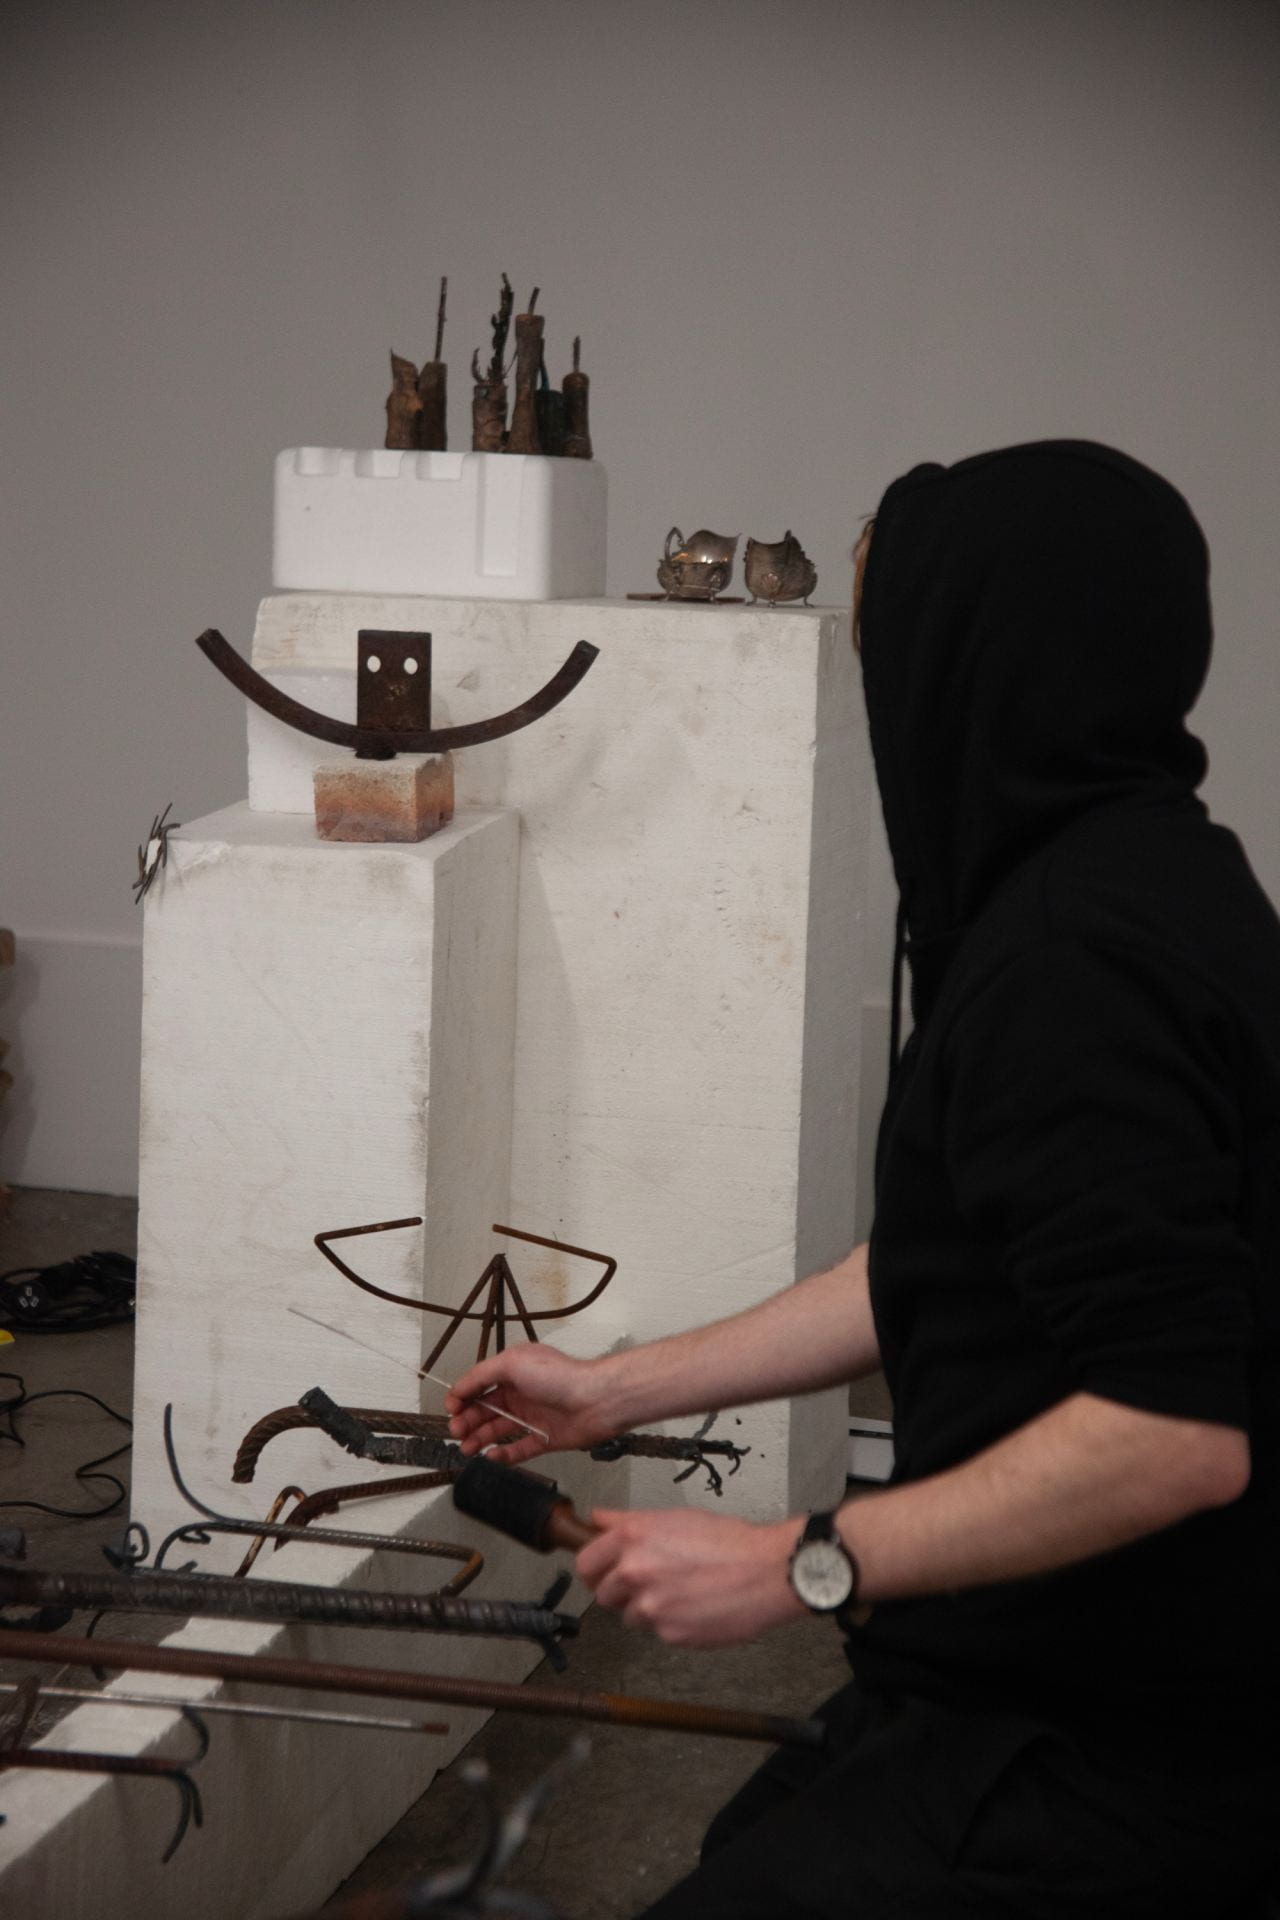 Alexander 'Pug' Williams, Dark Botanical sound-sculpture collaborative activation, 2023, found metal, fire brick, found pewter vessels, bronze, reclaimed styrofoam, contact microphones, amplification, gifted disc brake. Photo courtesy of the artist.